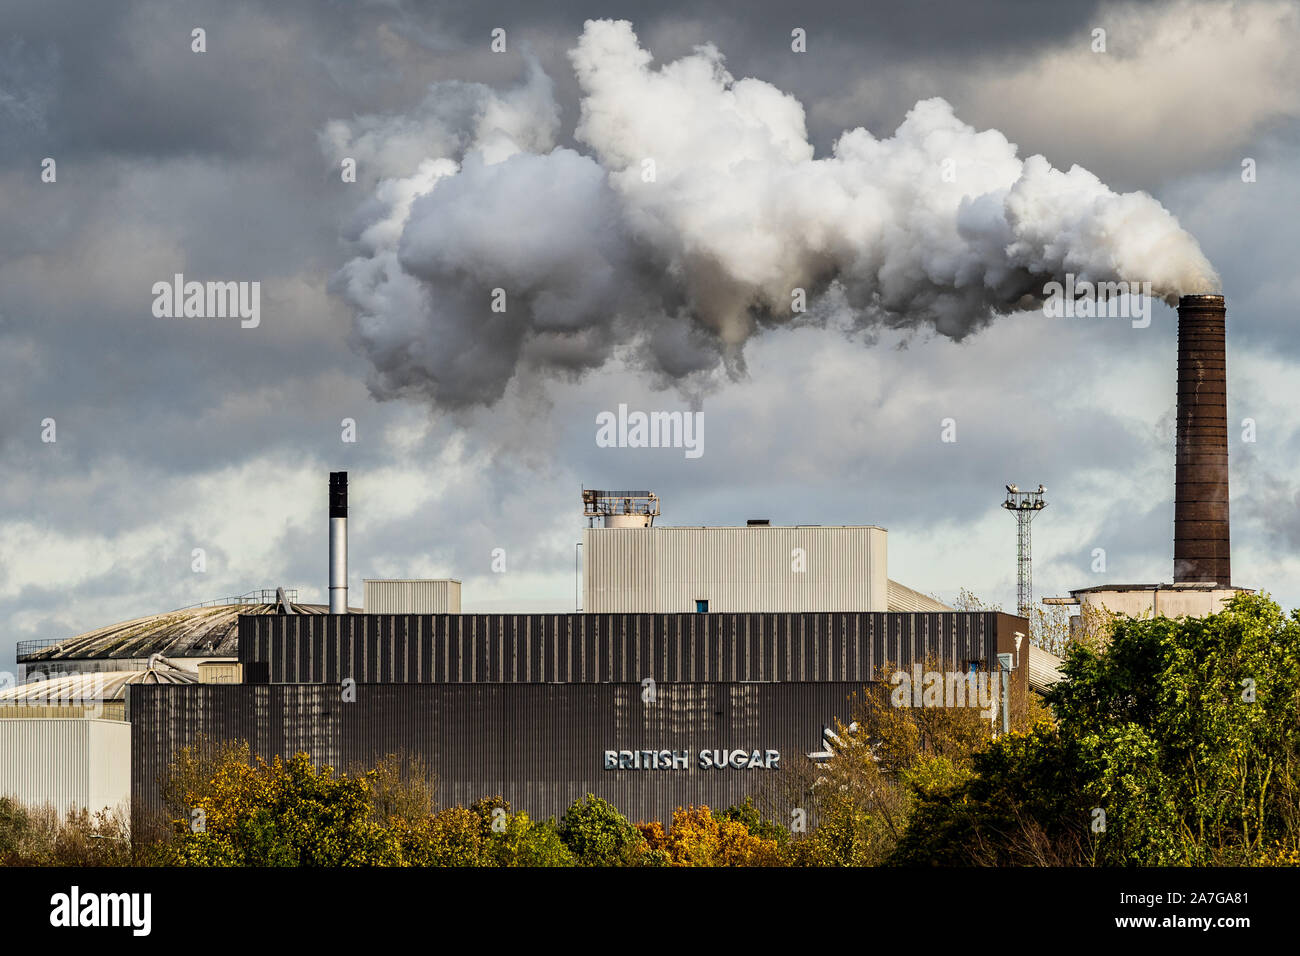 UK Factory emissions  - Sugar Beet Factory Chimneys - steam rises from the British Sugar factory in Bury St Edmunds Suffolk UK Stock Photo